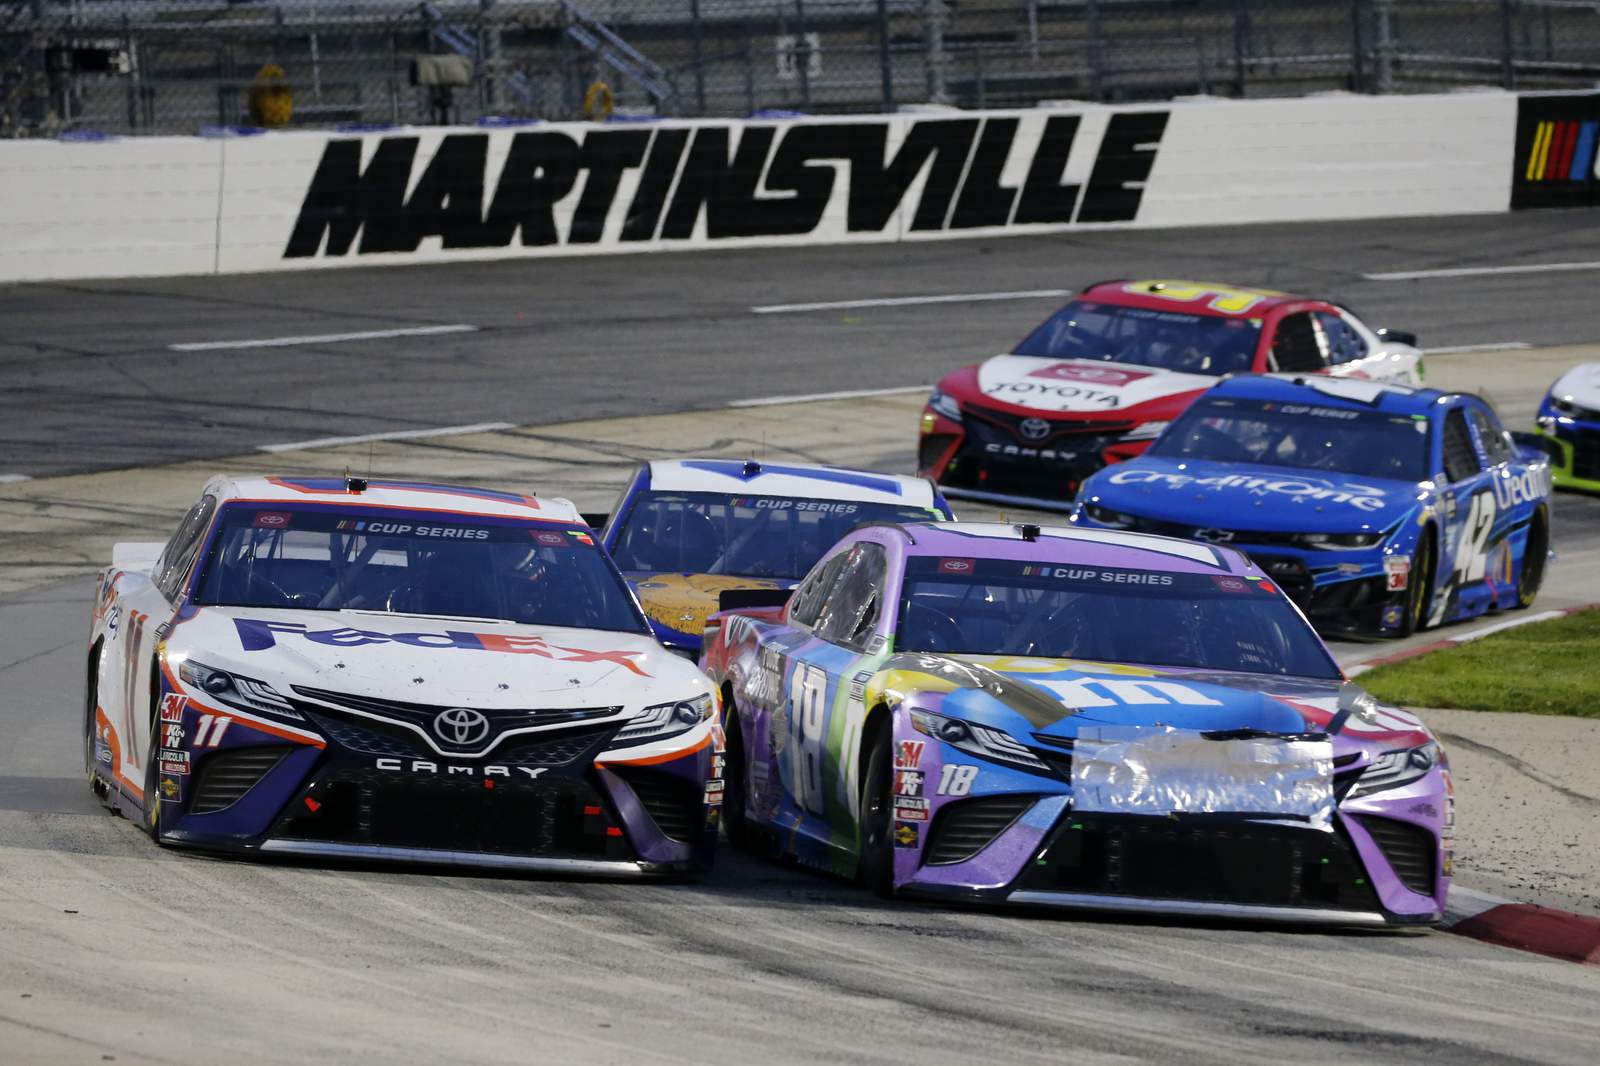 Truex ends 2020 winless skid with victory at Martinsville